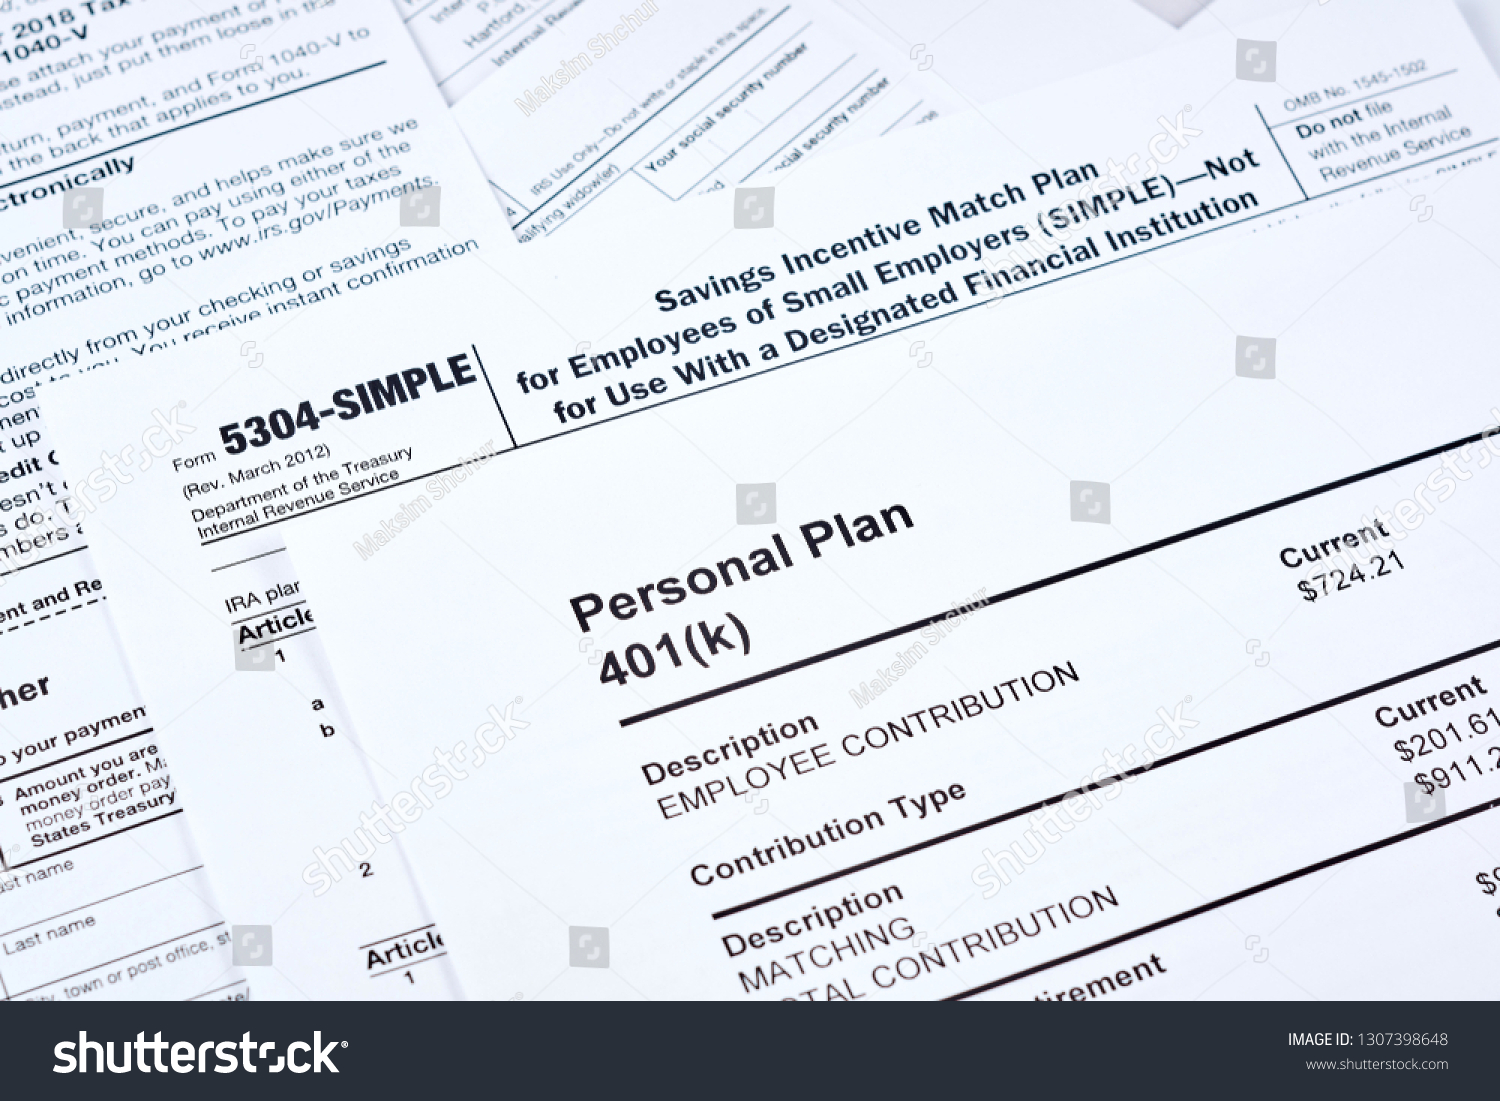 Tax reporting and retirement plan. Personal plan 401k form on against background 5304-simple tax form and other forms #1307398648